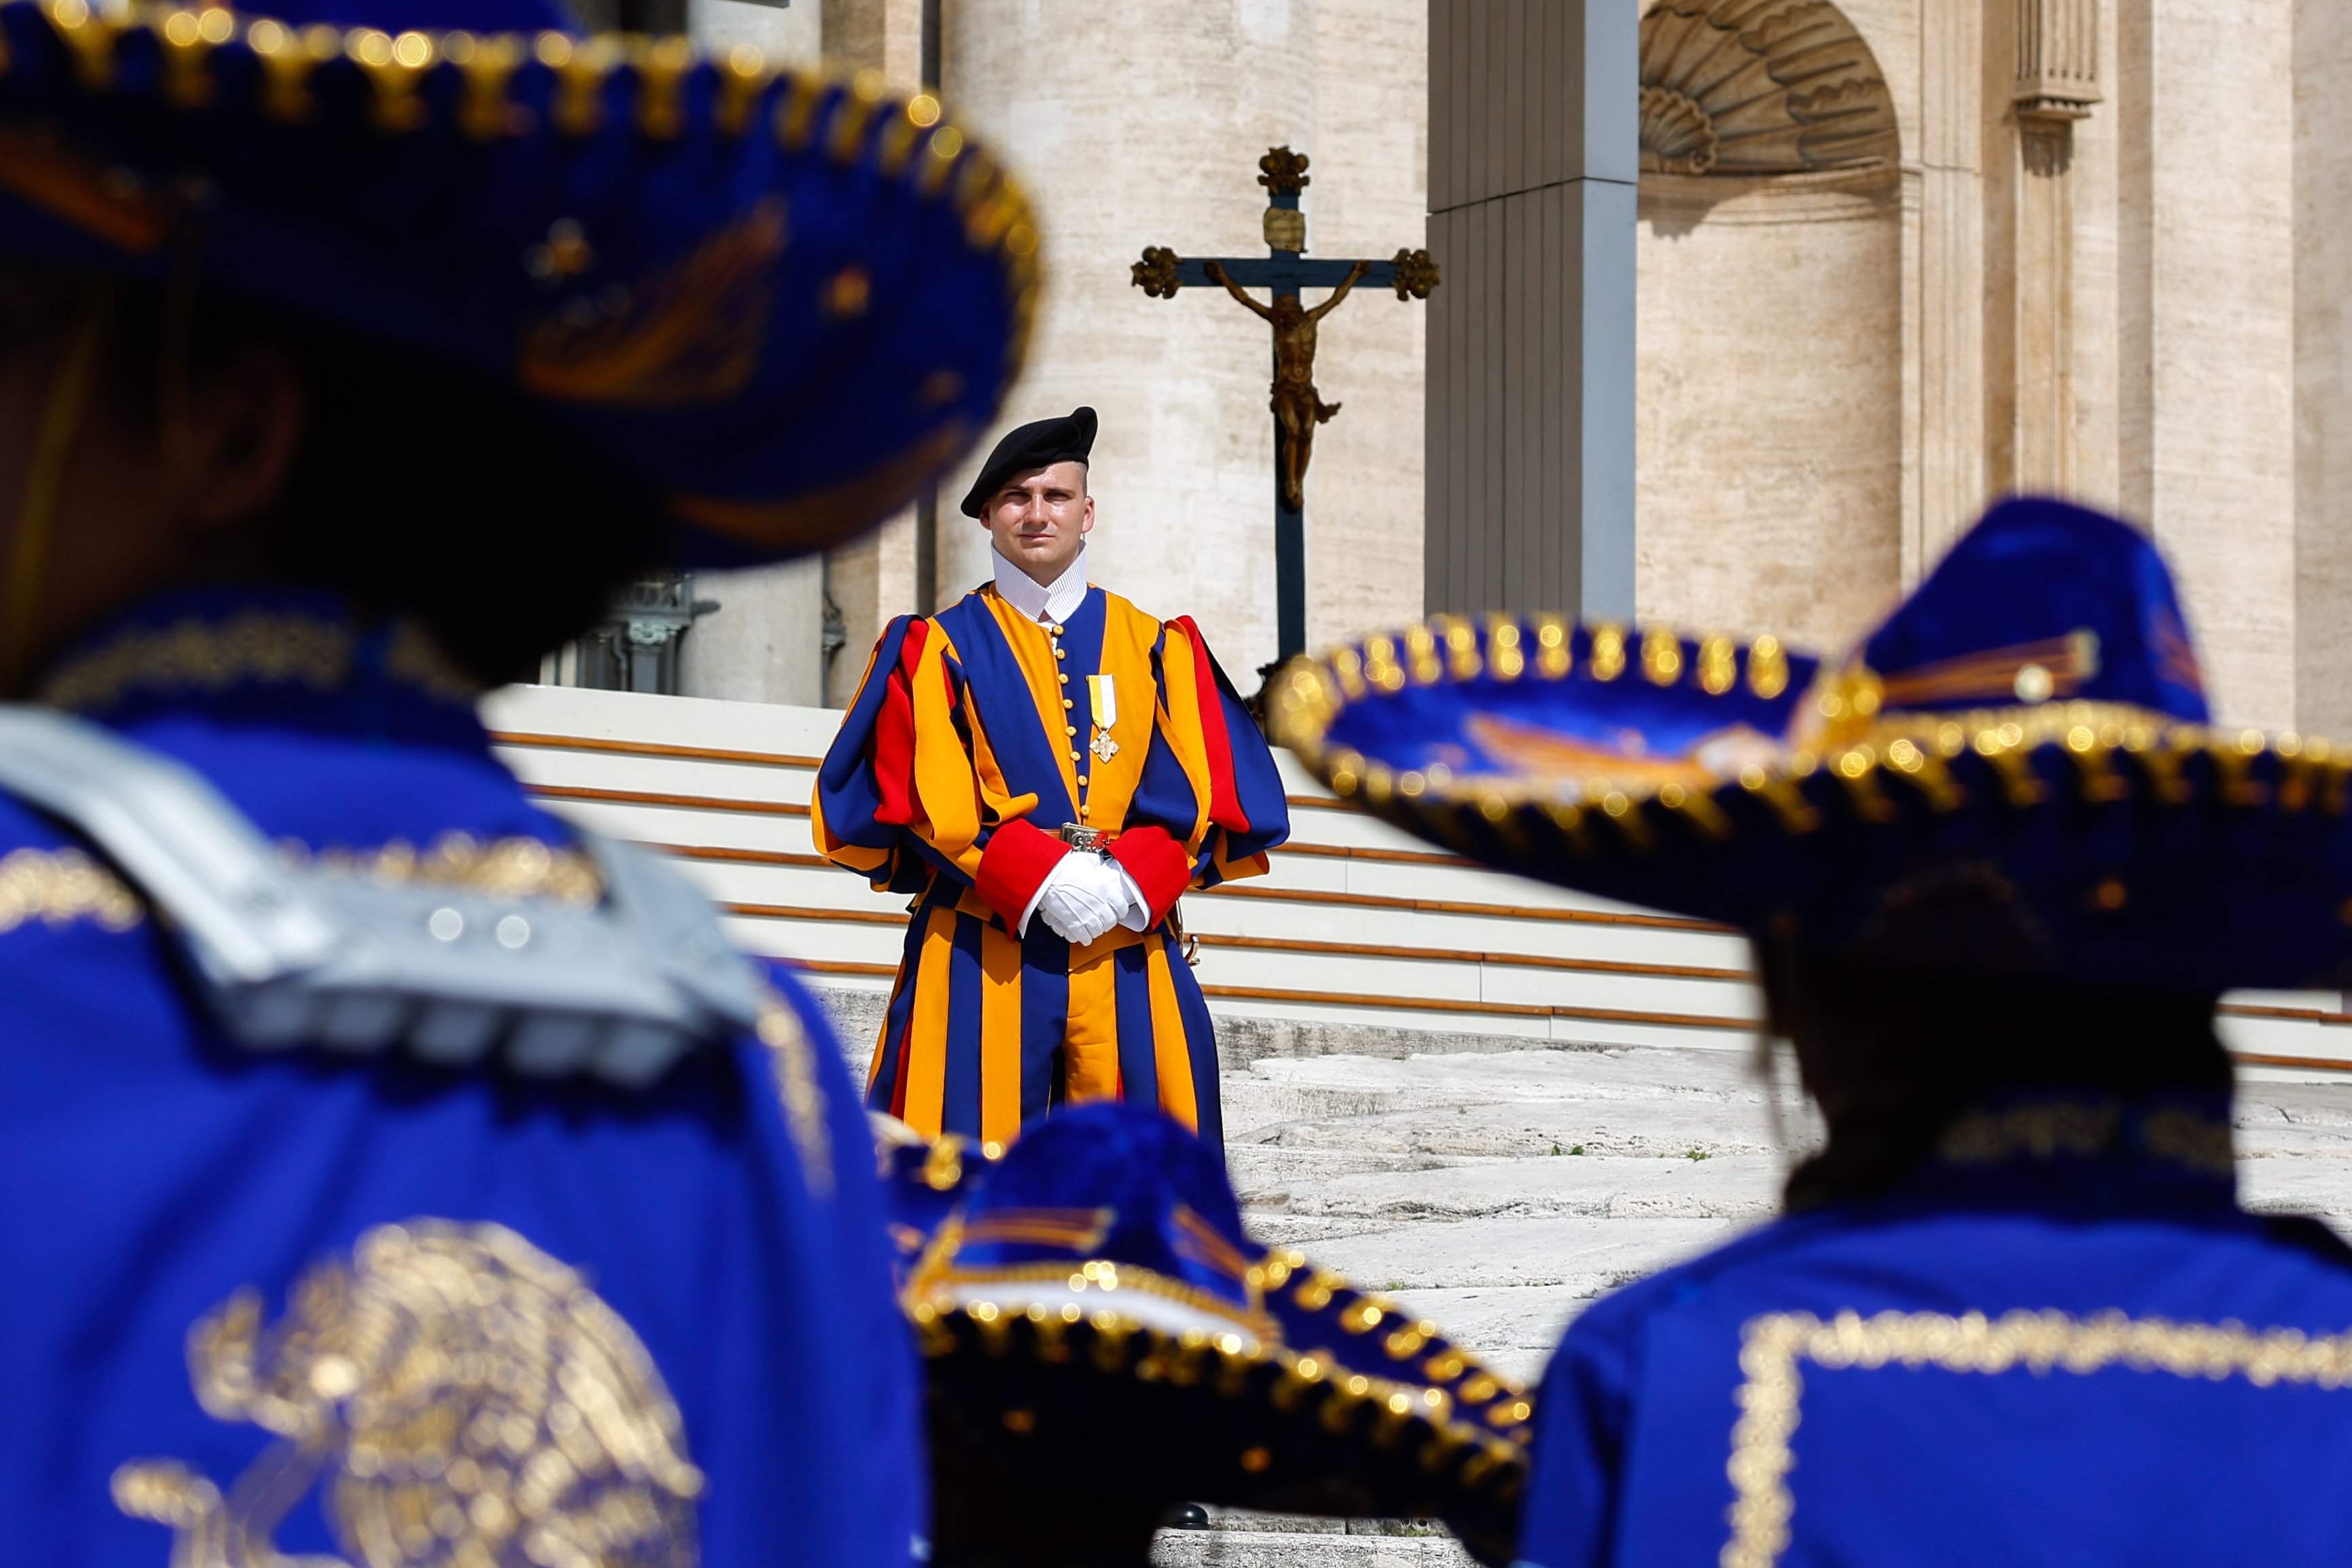 A Swiss Guard stands at attention.